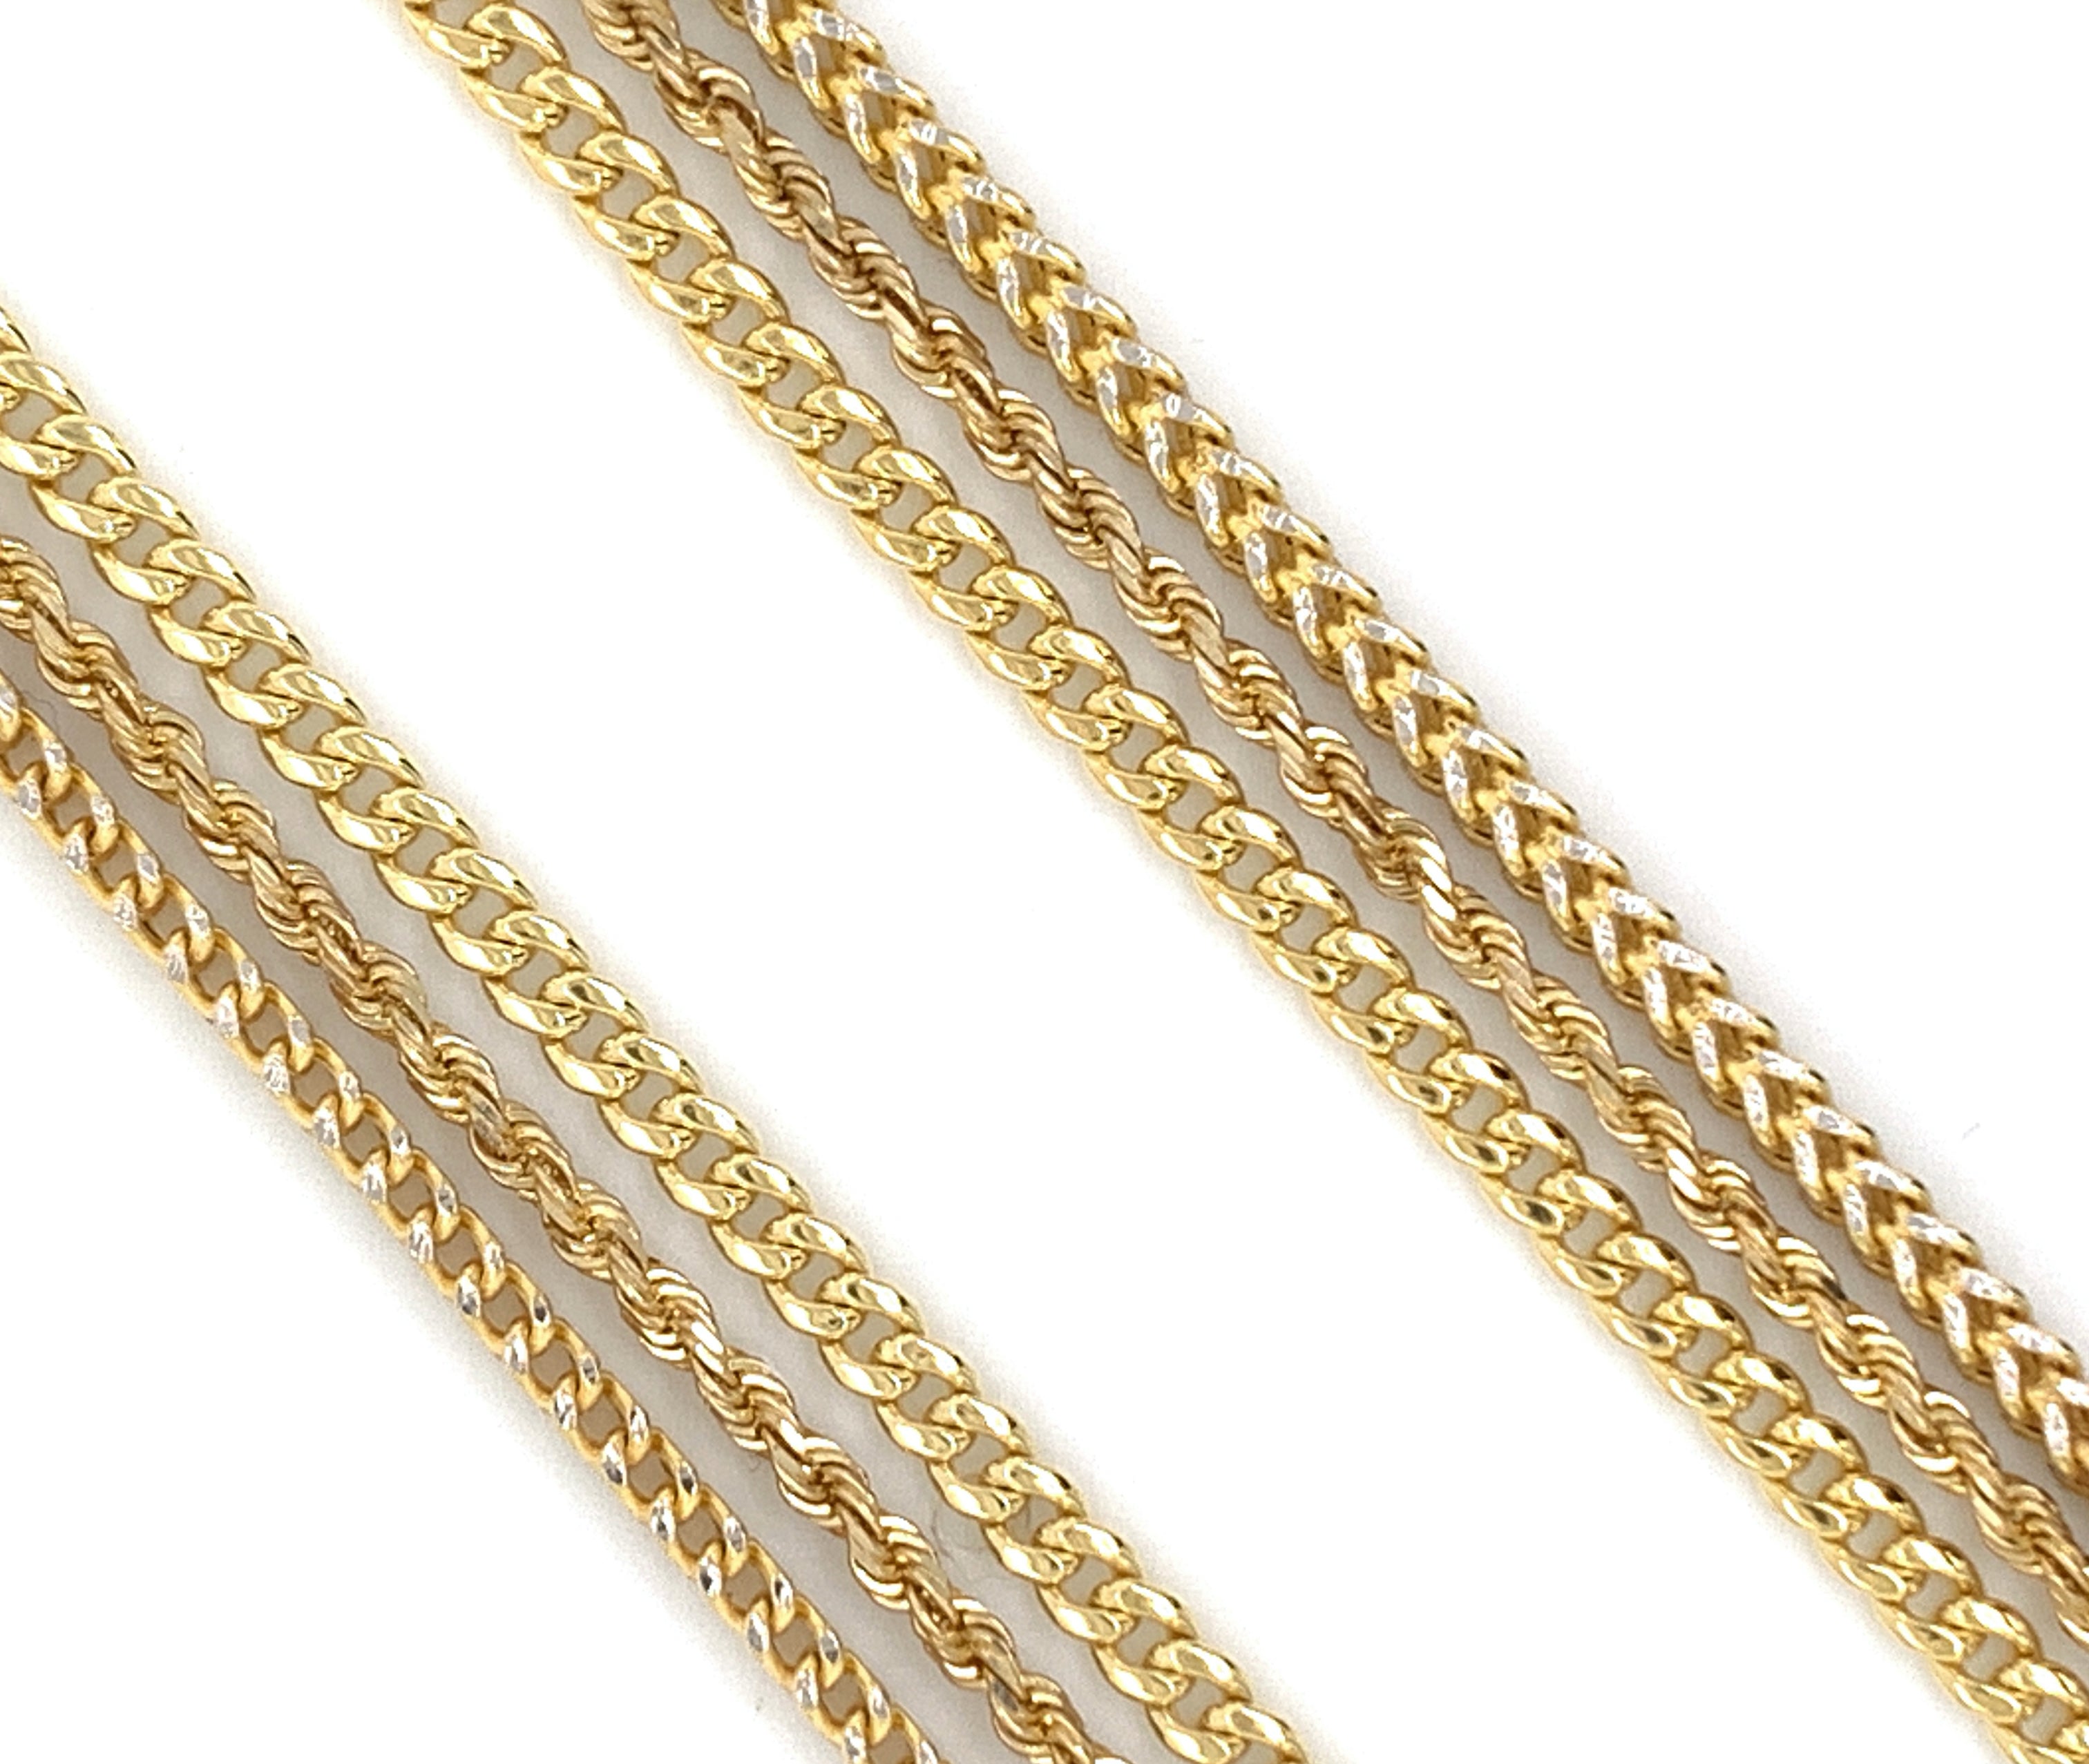 Gold Chains - 10K and 14K Gold Chains – White Carat - USA & Canada